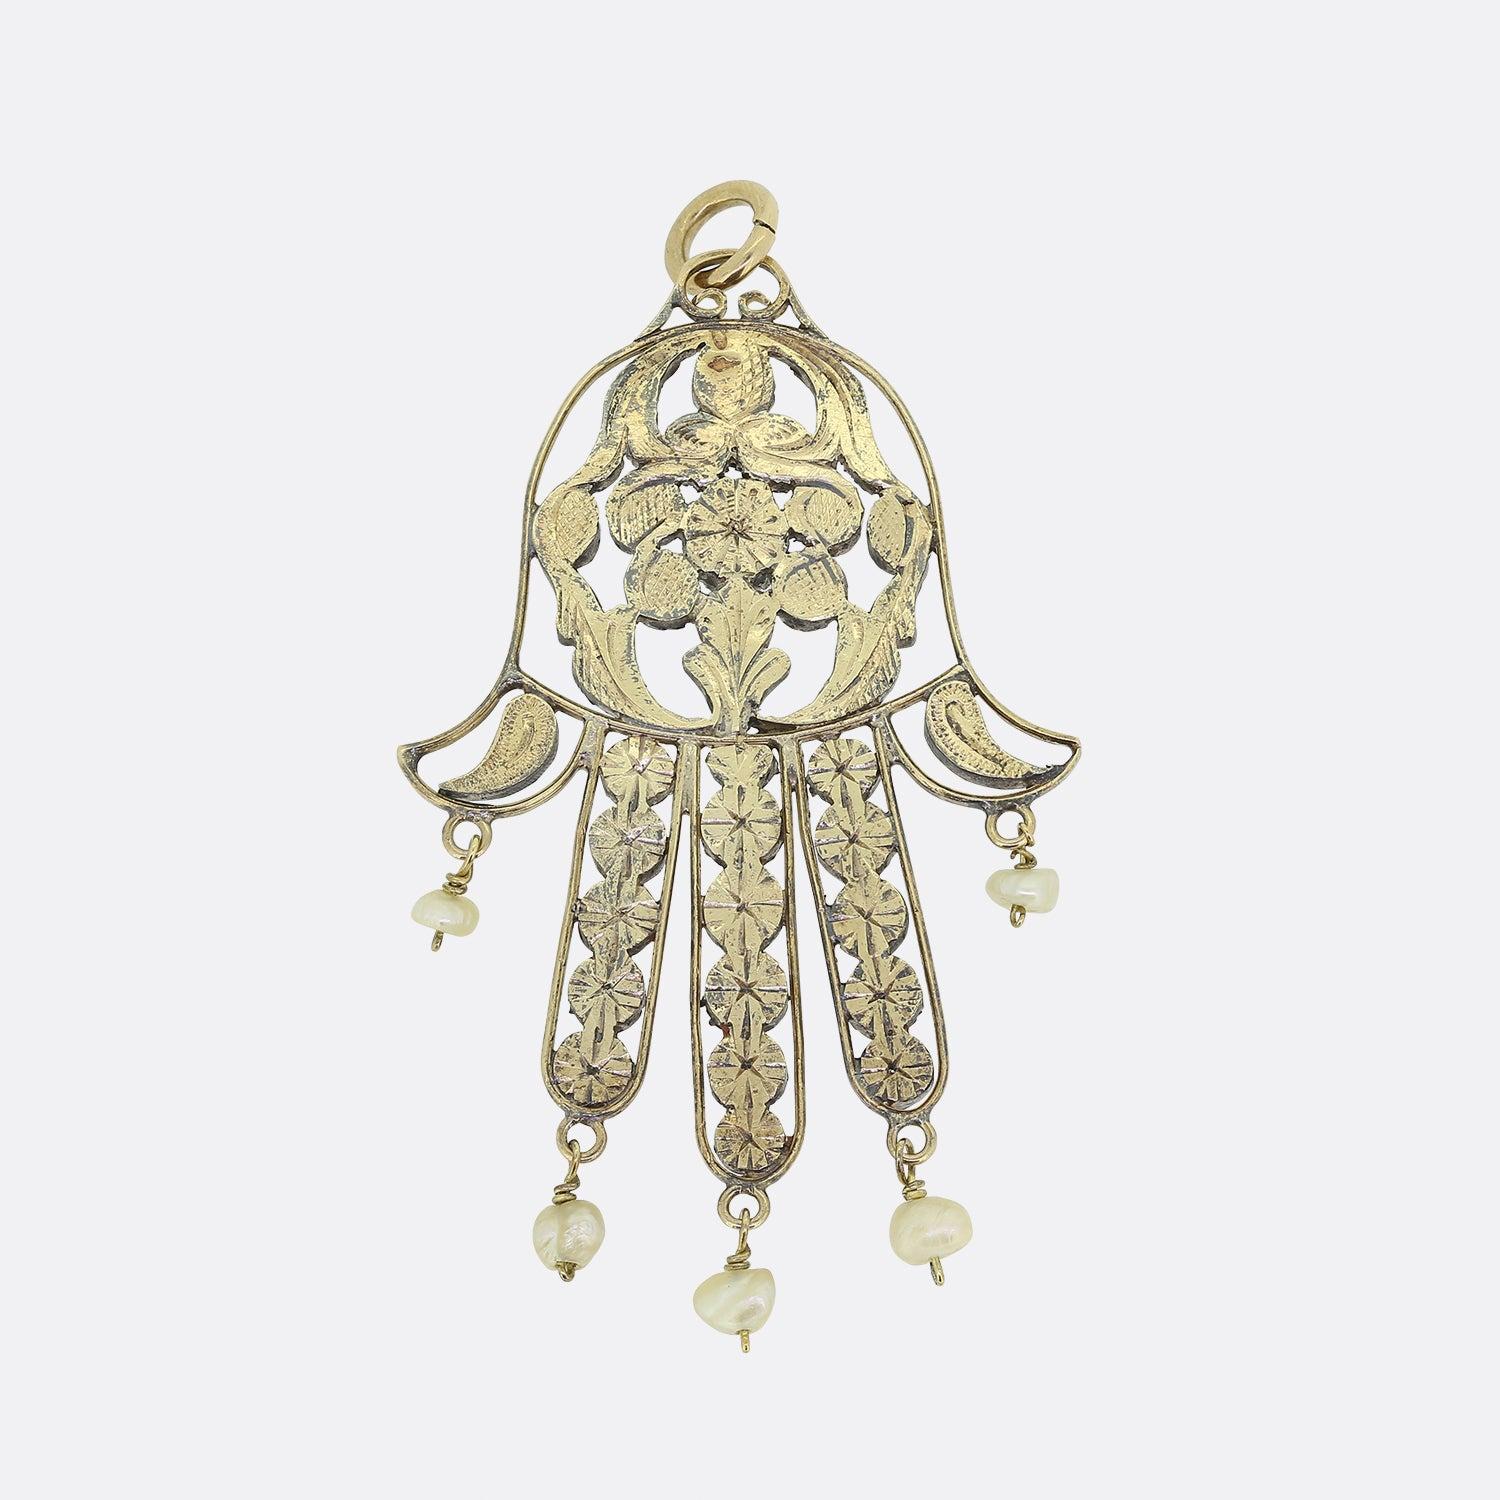 Here we have a lovely Vintage pearl and diamond pendant. This piece has been crafted into the shape of a Hamsa hand and has been set with an array of rose cut diamonds with pearl drops that hang from each finger. The back of the pendant has been